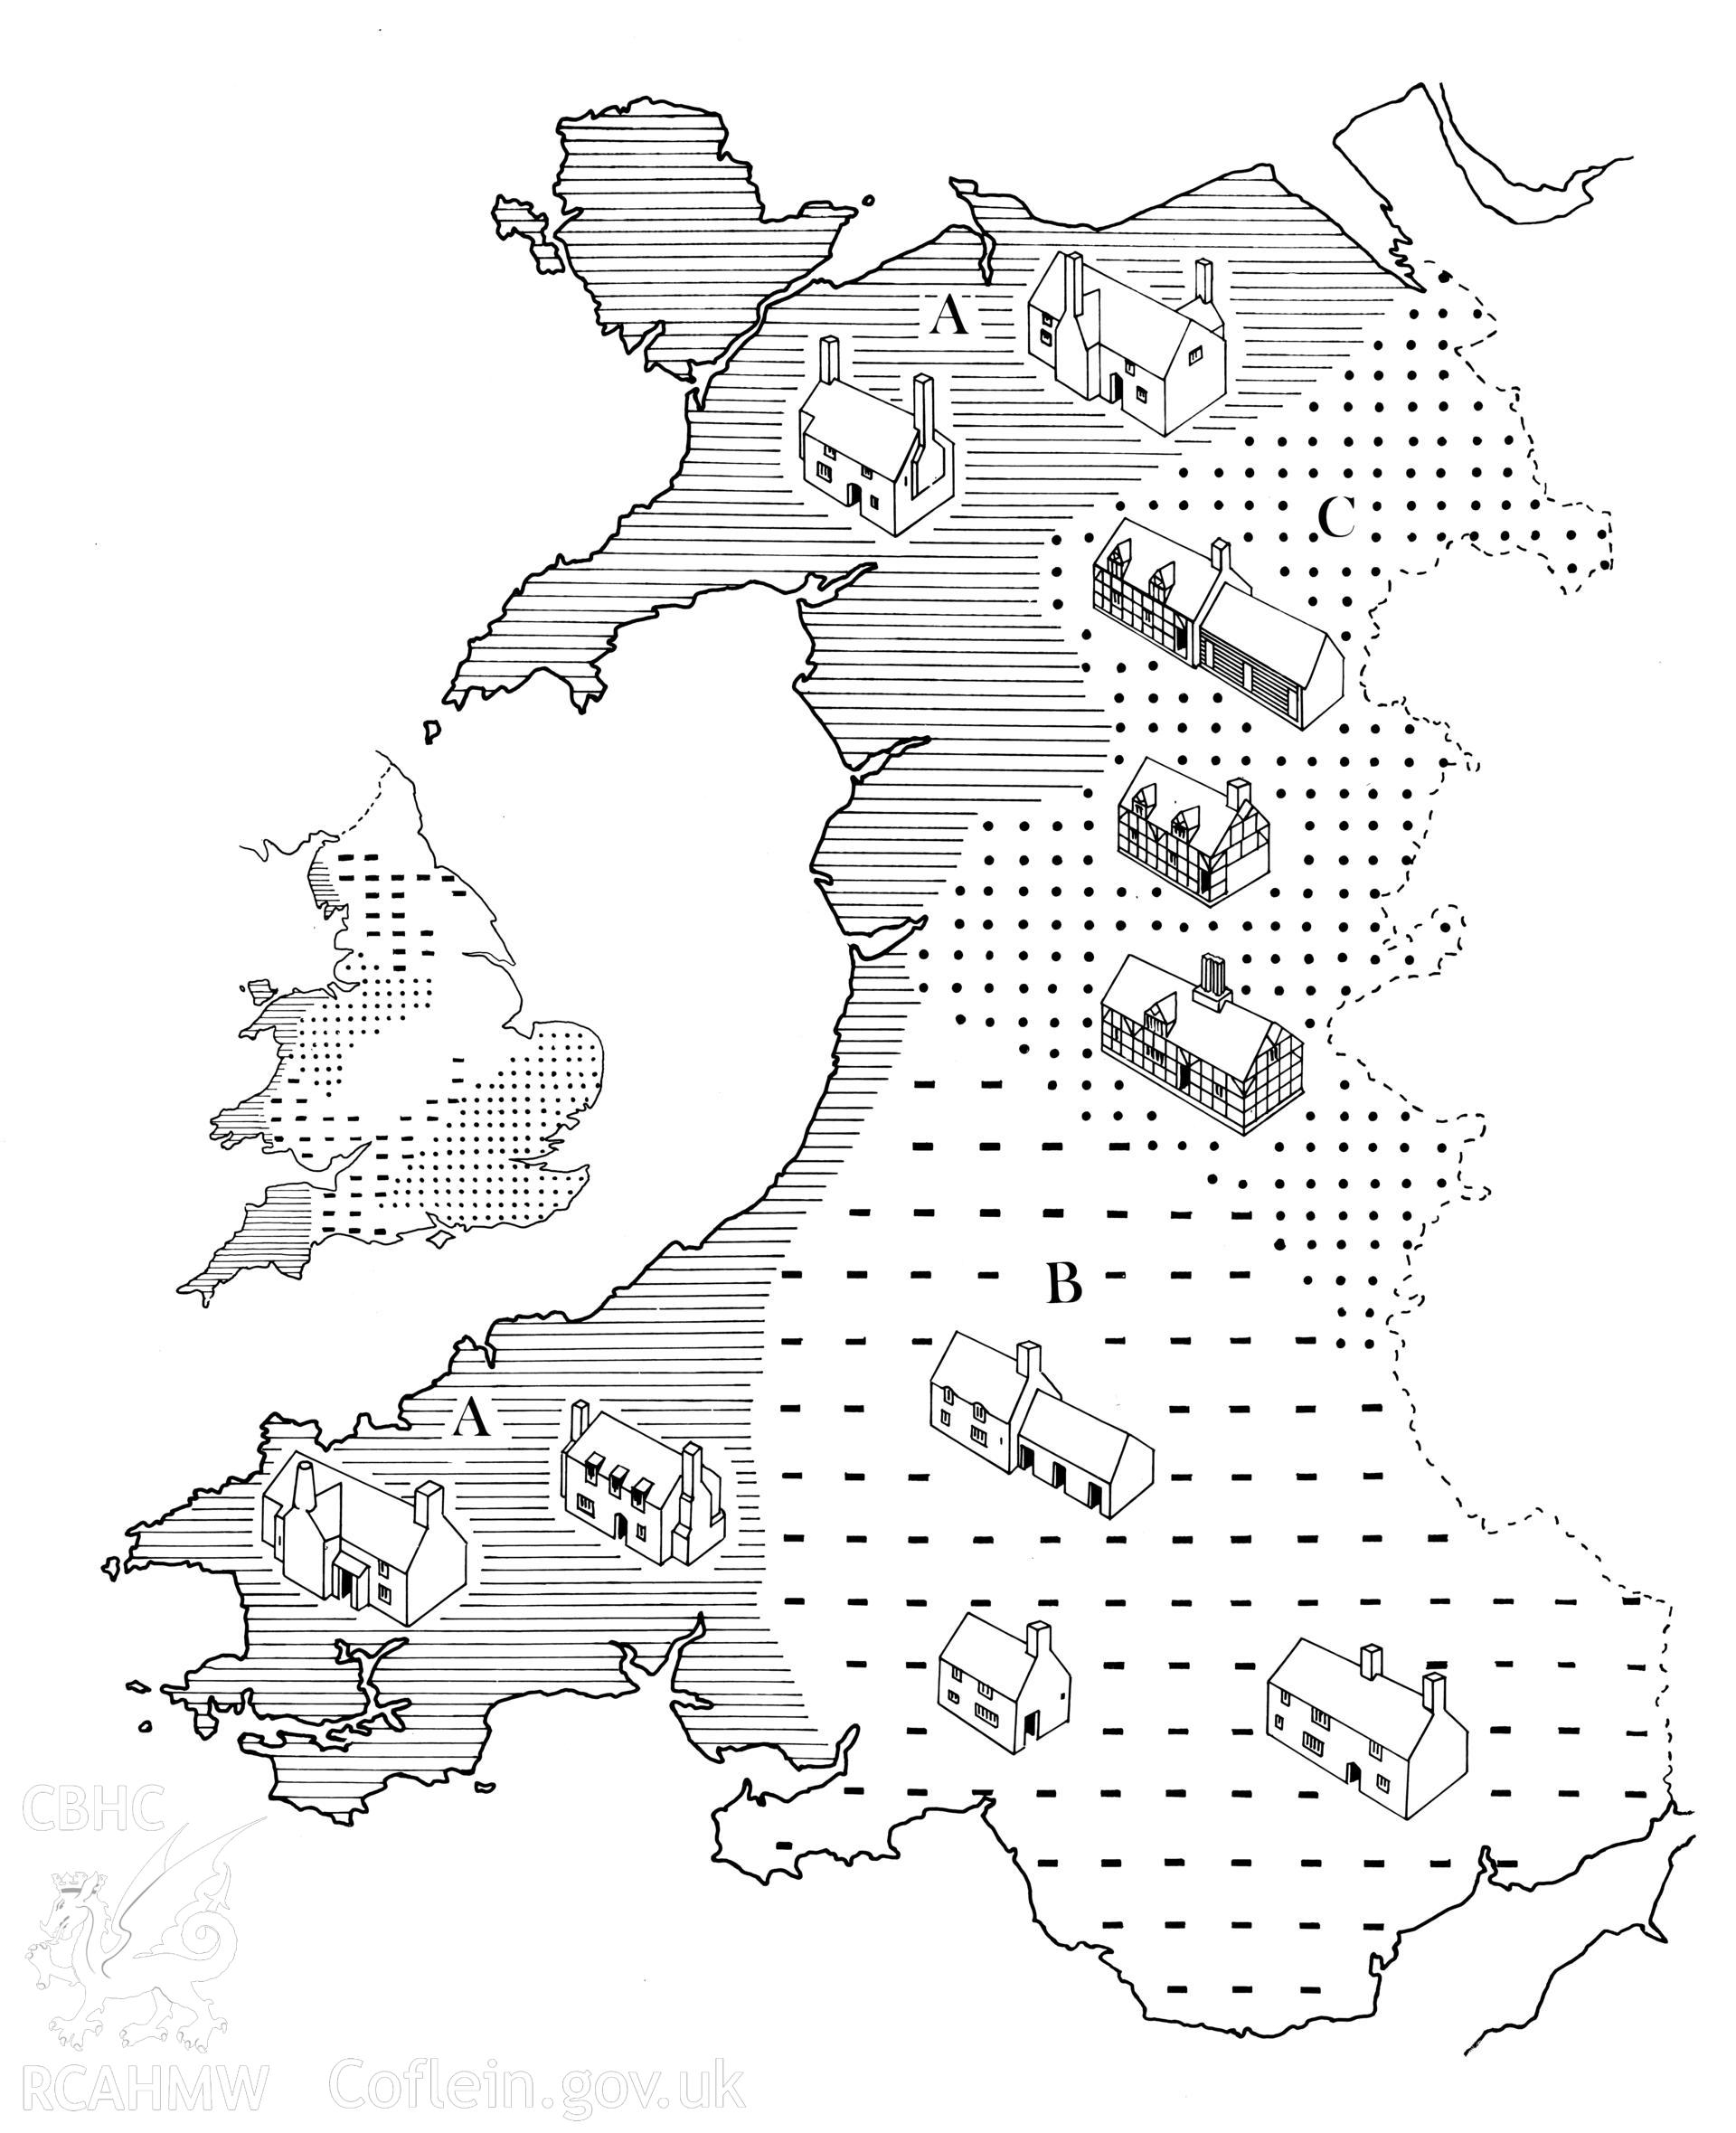 Volume 3, Figure 61: Map showing 'Sub-medieval house-types: locations'.